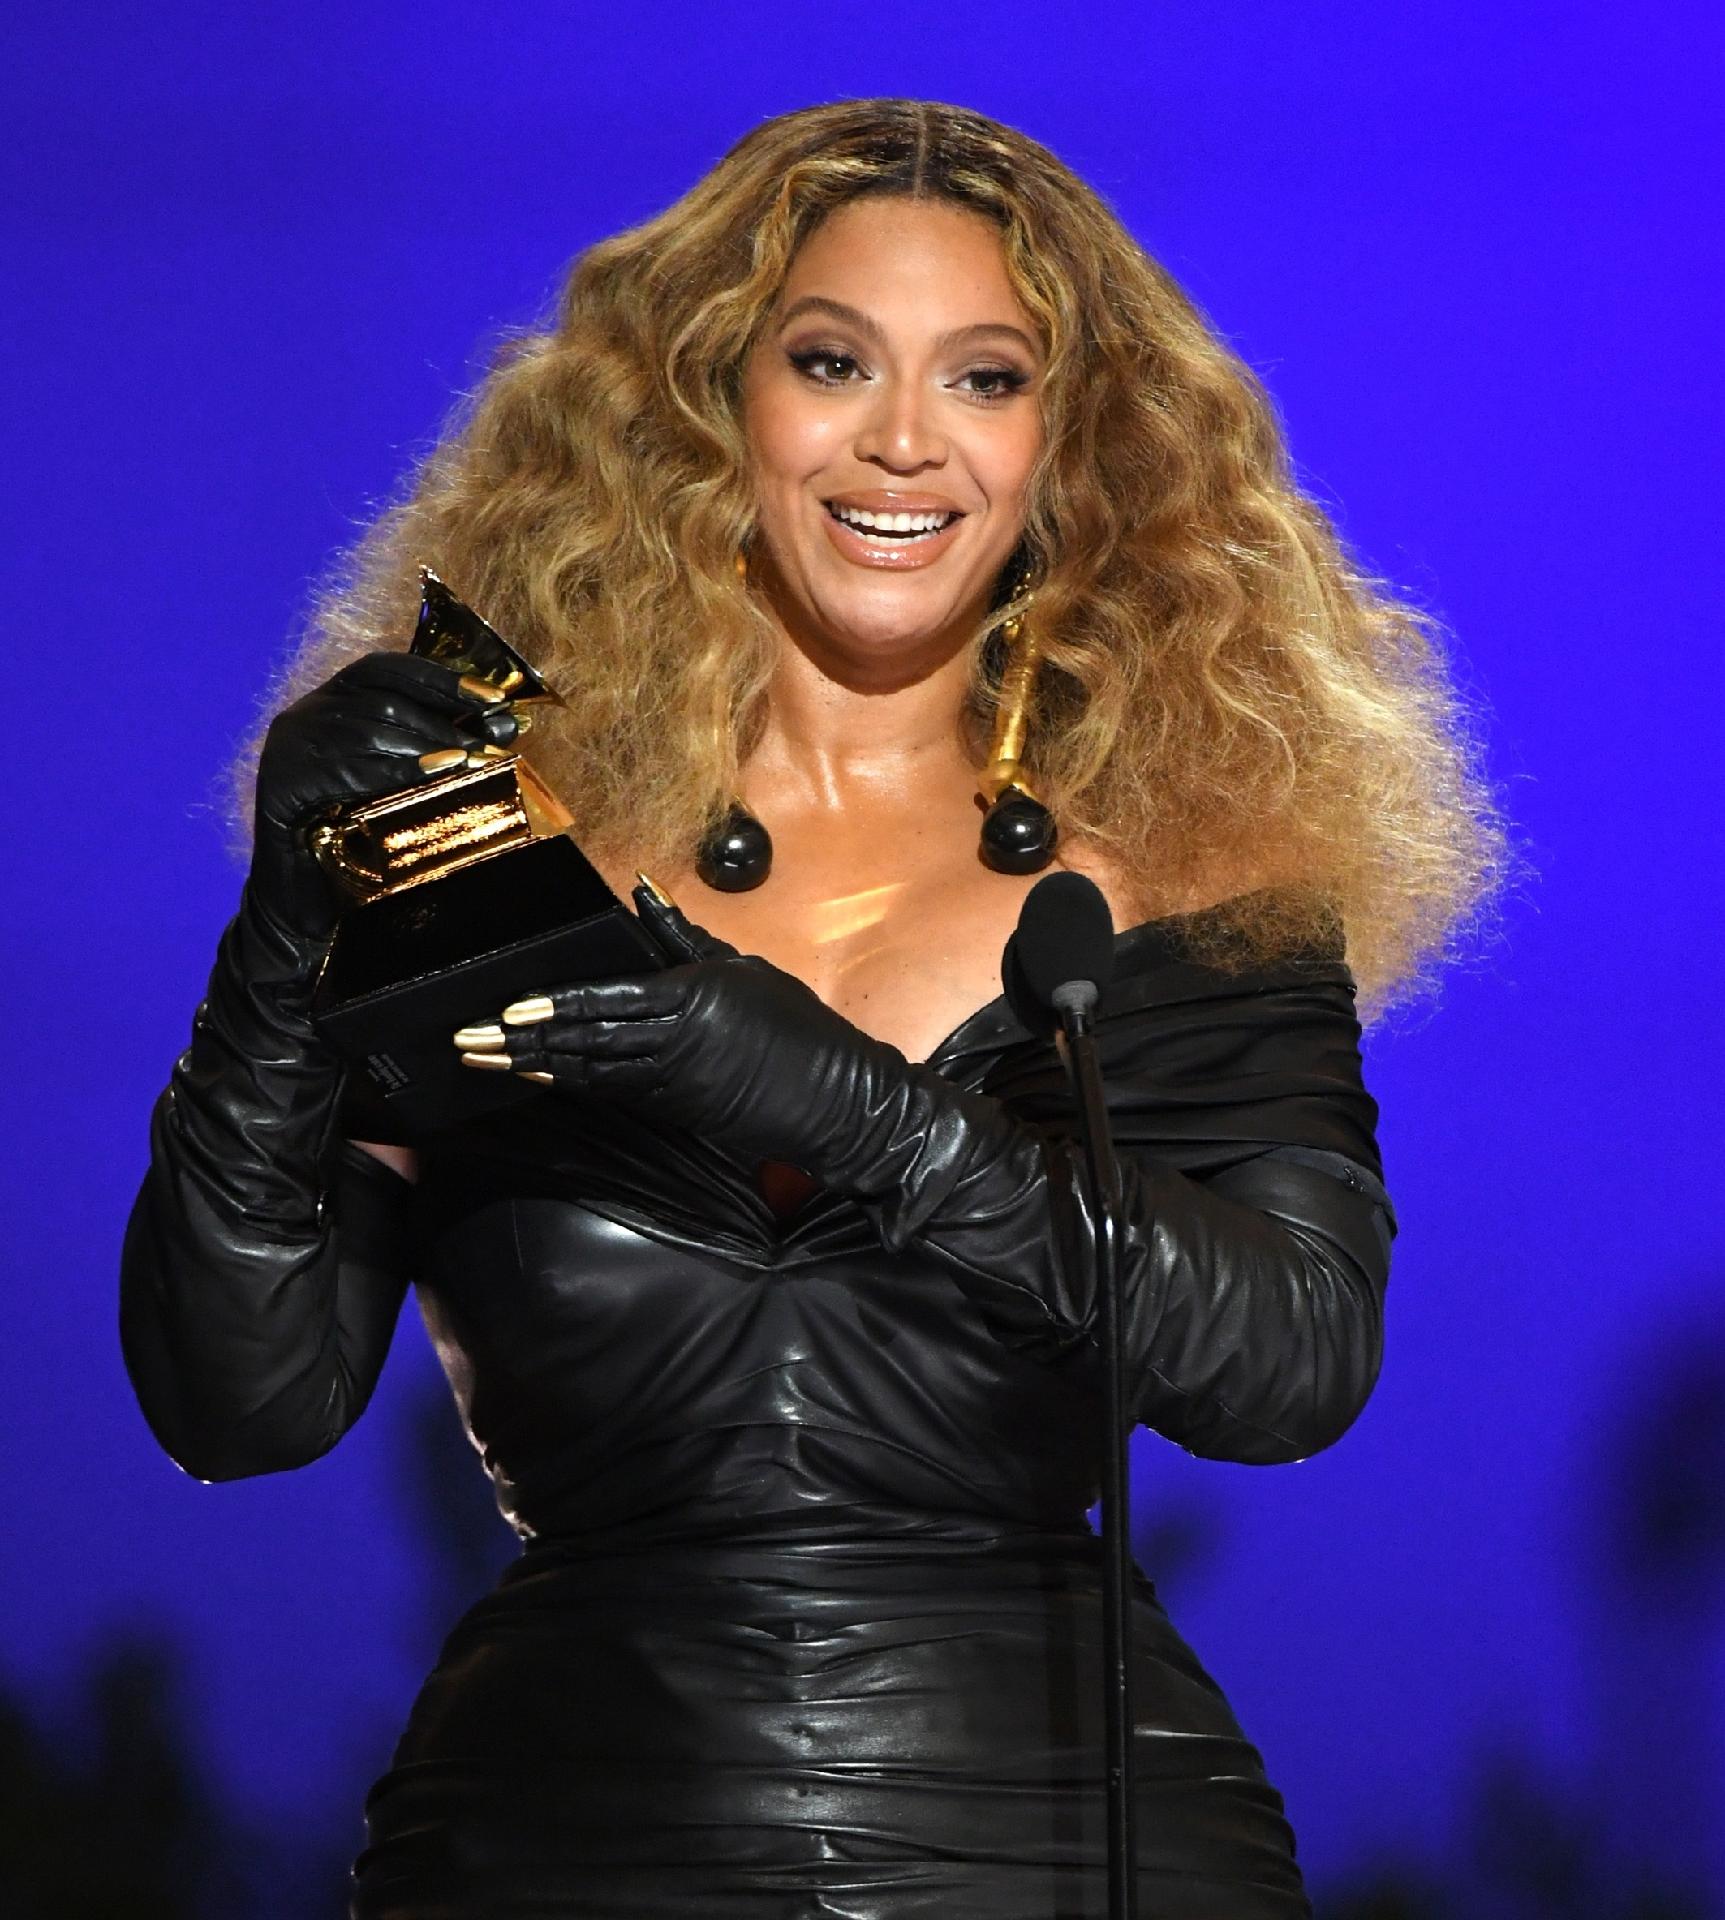 Beyoncé Biography: Net Worth, Children, Pictures, Songs, Husband, Real Name, Albums, Birthday, Height, Wiki Facts, Parents, And More..., Beyoncé Biography: Net Worth, Children, Pictures, Songs, Husband, Real Name, Albums, Birthday, Height, Wiki Facts, Parents, And More&#8230;